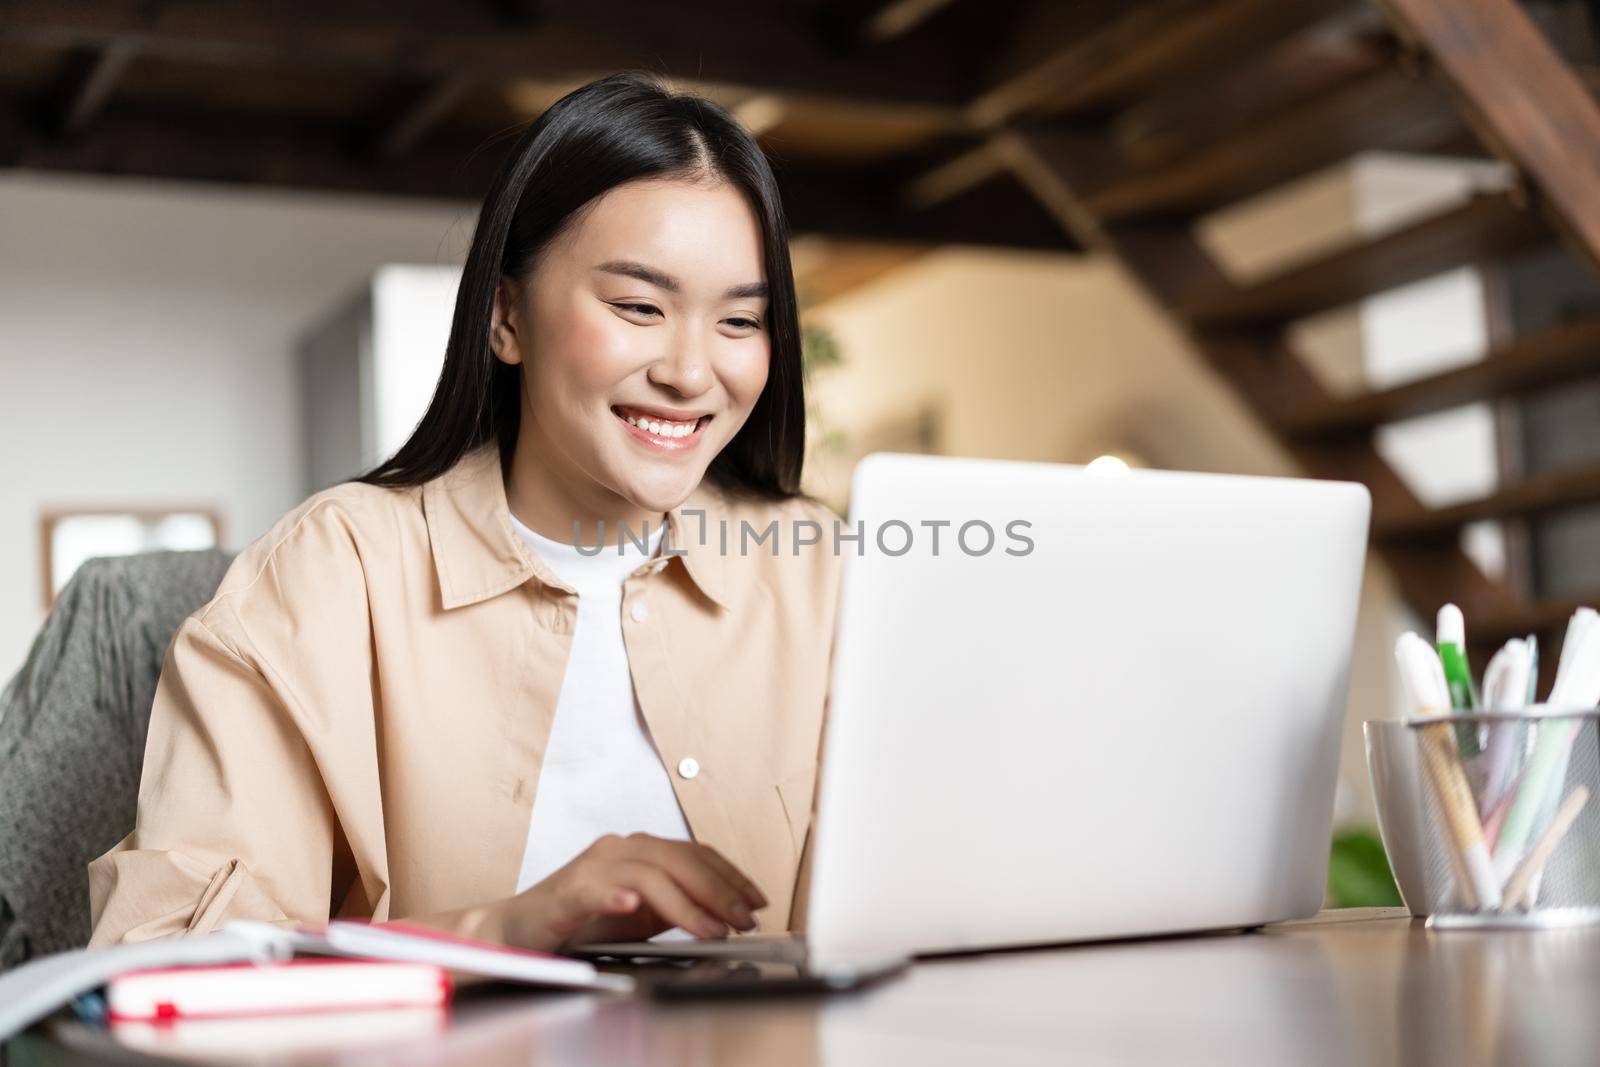 Smiling asian girl waching webinar, having work video call from home, working freelance remotely, looking happy at computer.